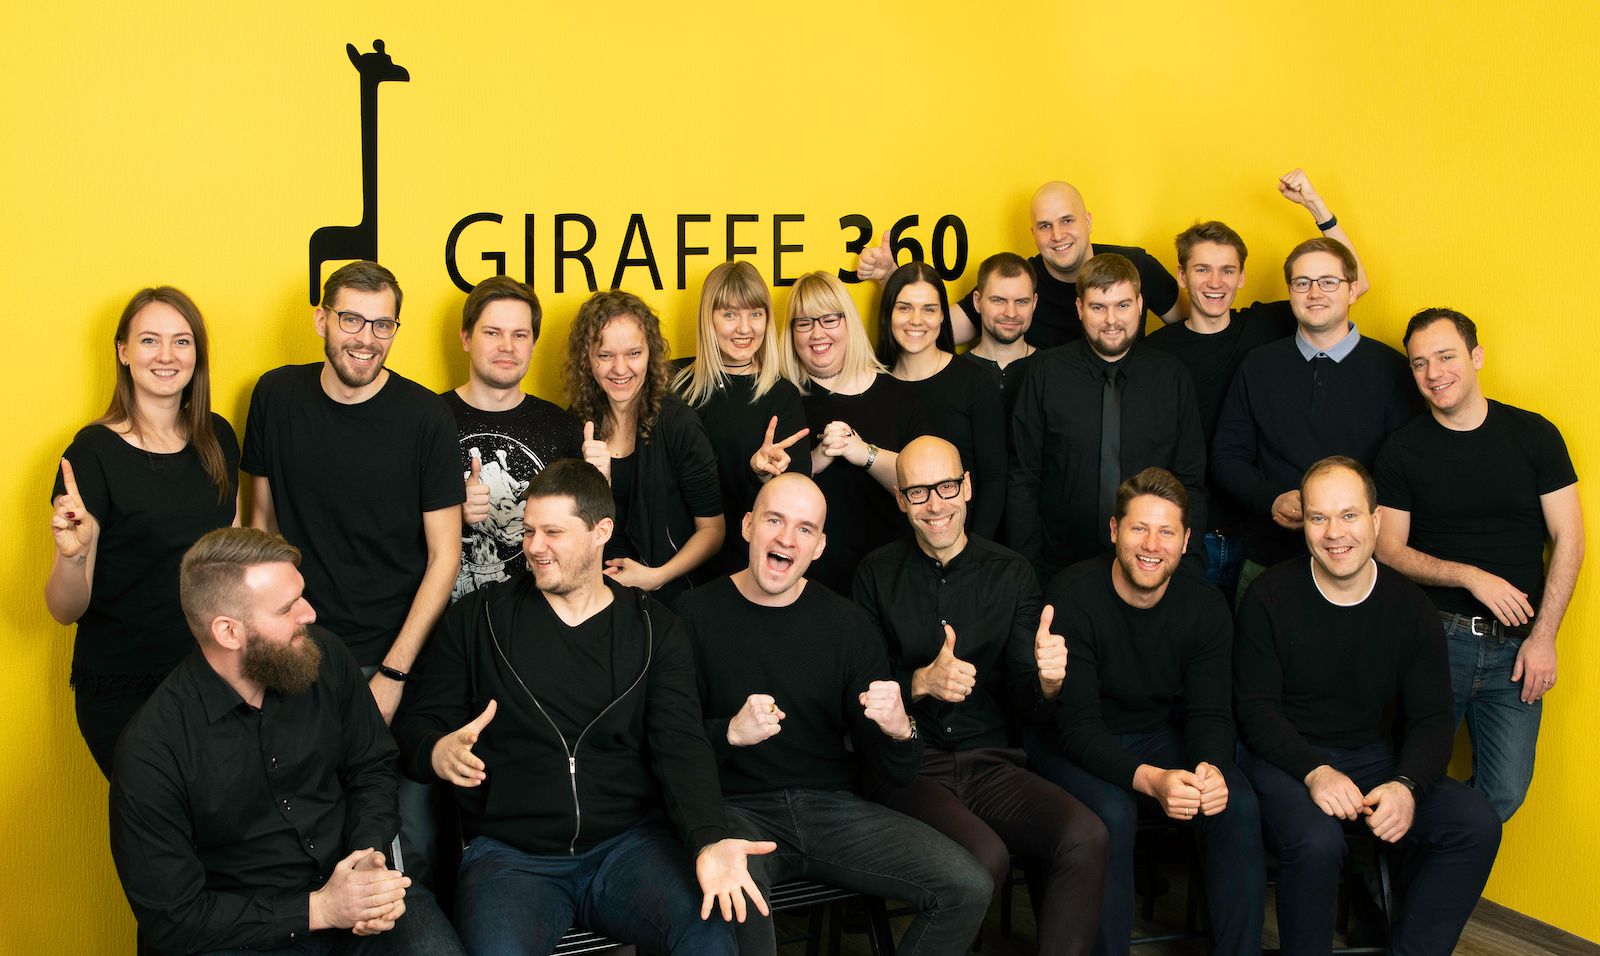 As ask for staunch property VR booms, Founders Fund leads $16M round into Giraffe360 platform thumbnail